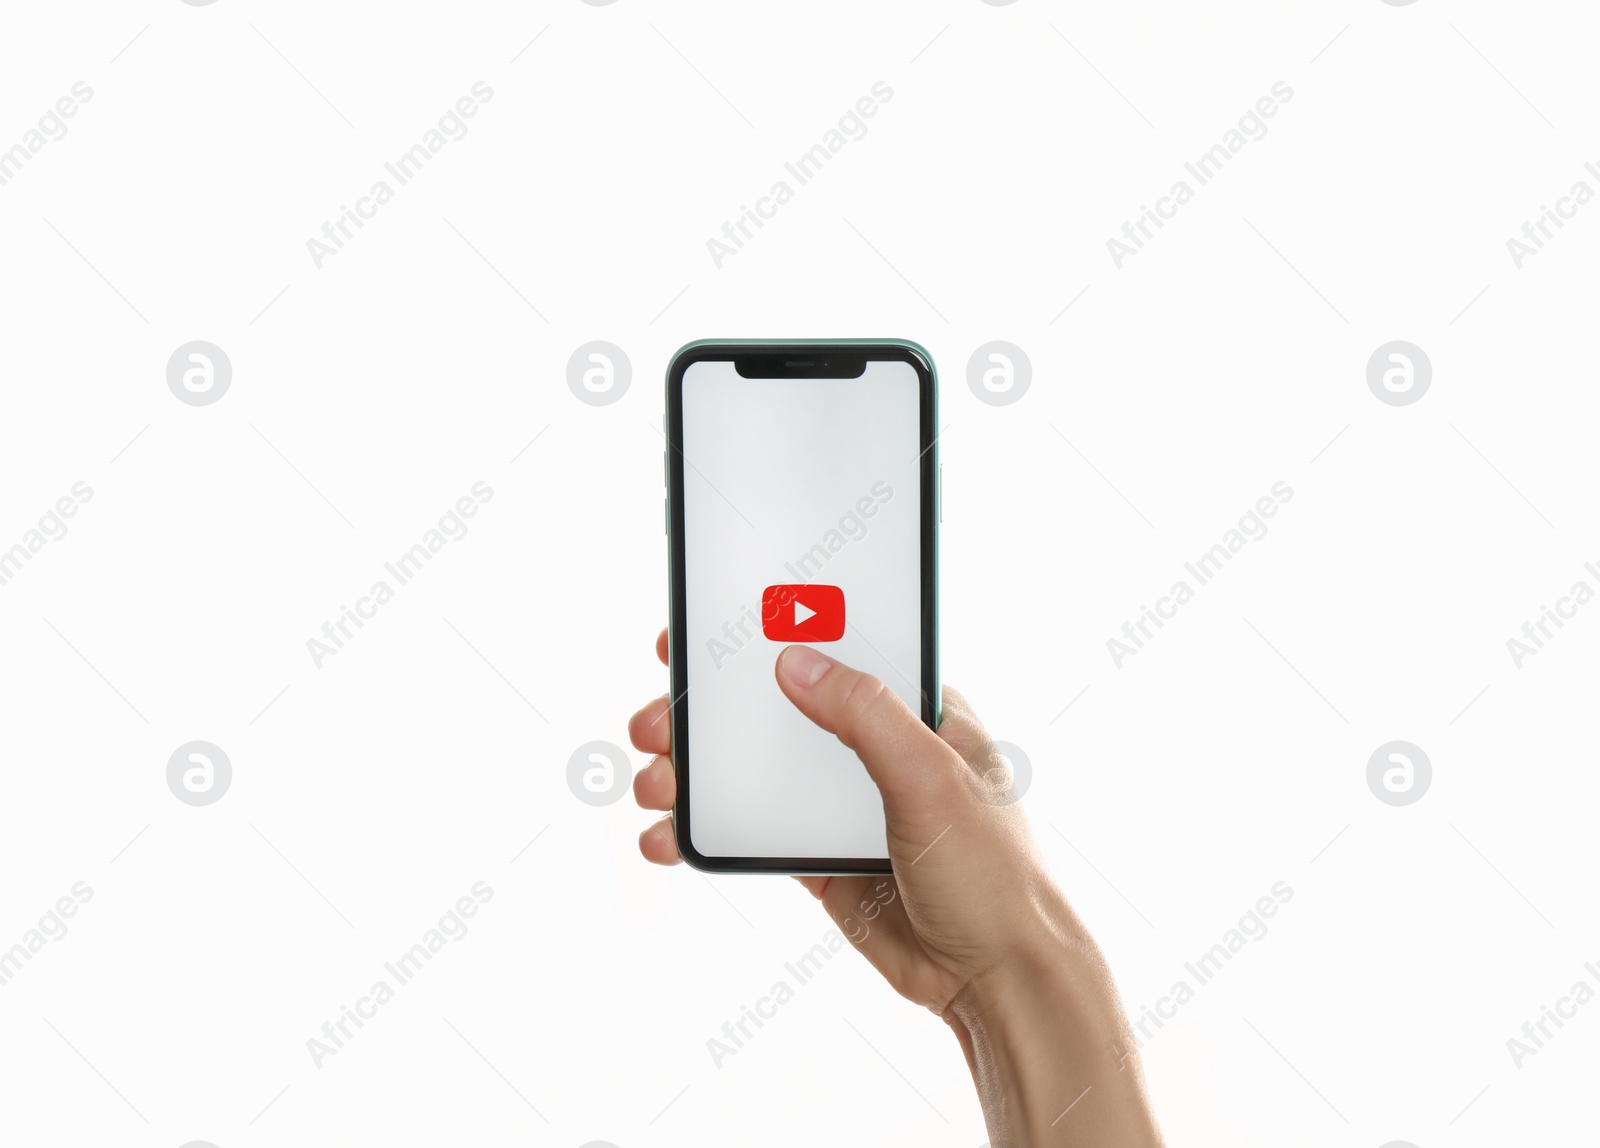 Photo of MYKOLAIV, UKRAINE - JULY 9, 2020: Woman holding iPhone 11 with Youtube app on screen against white background, closeup